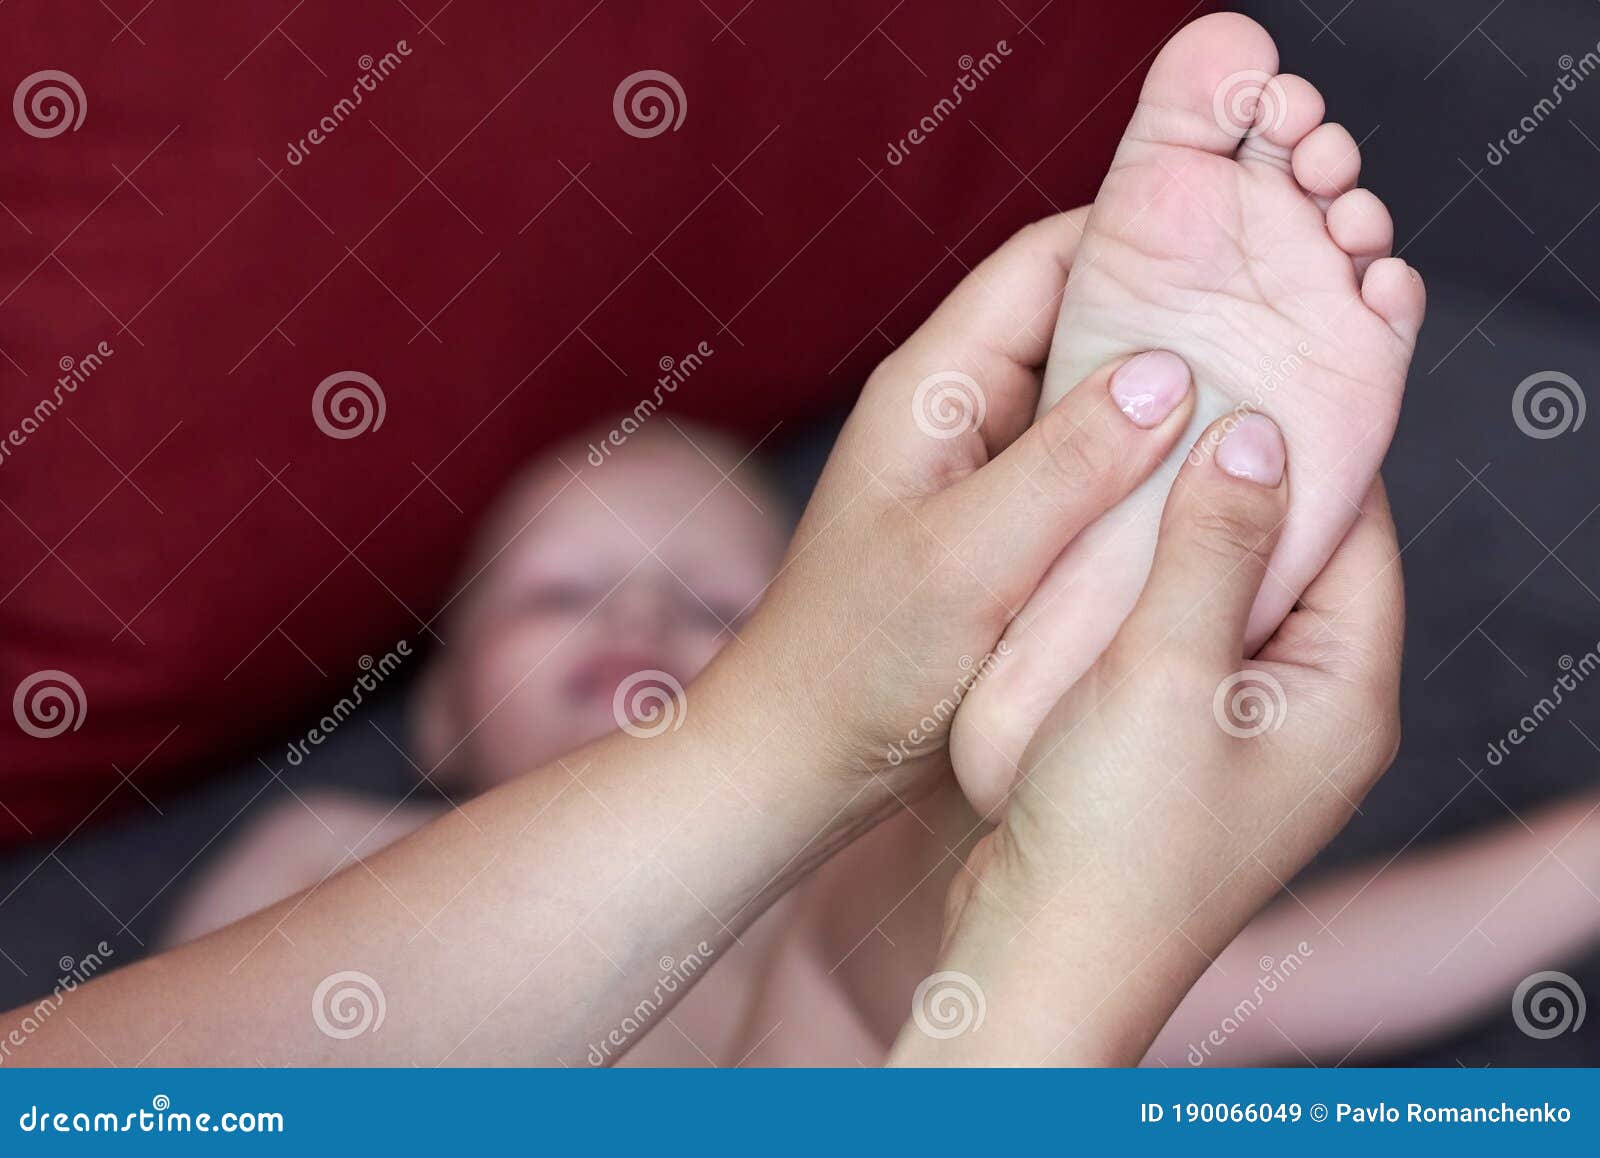 Mom Makes Foot Massage To Her Young Child Stock Image Image